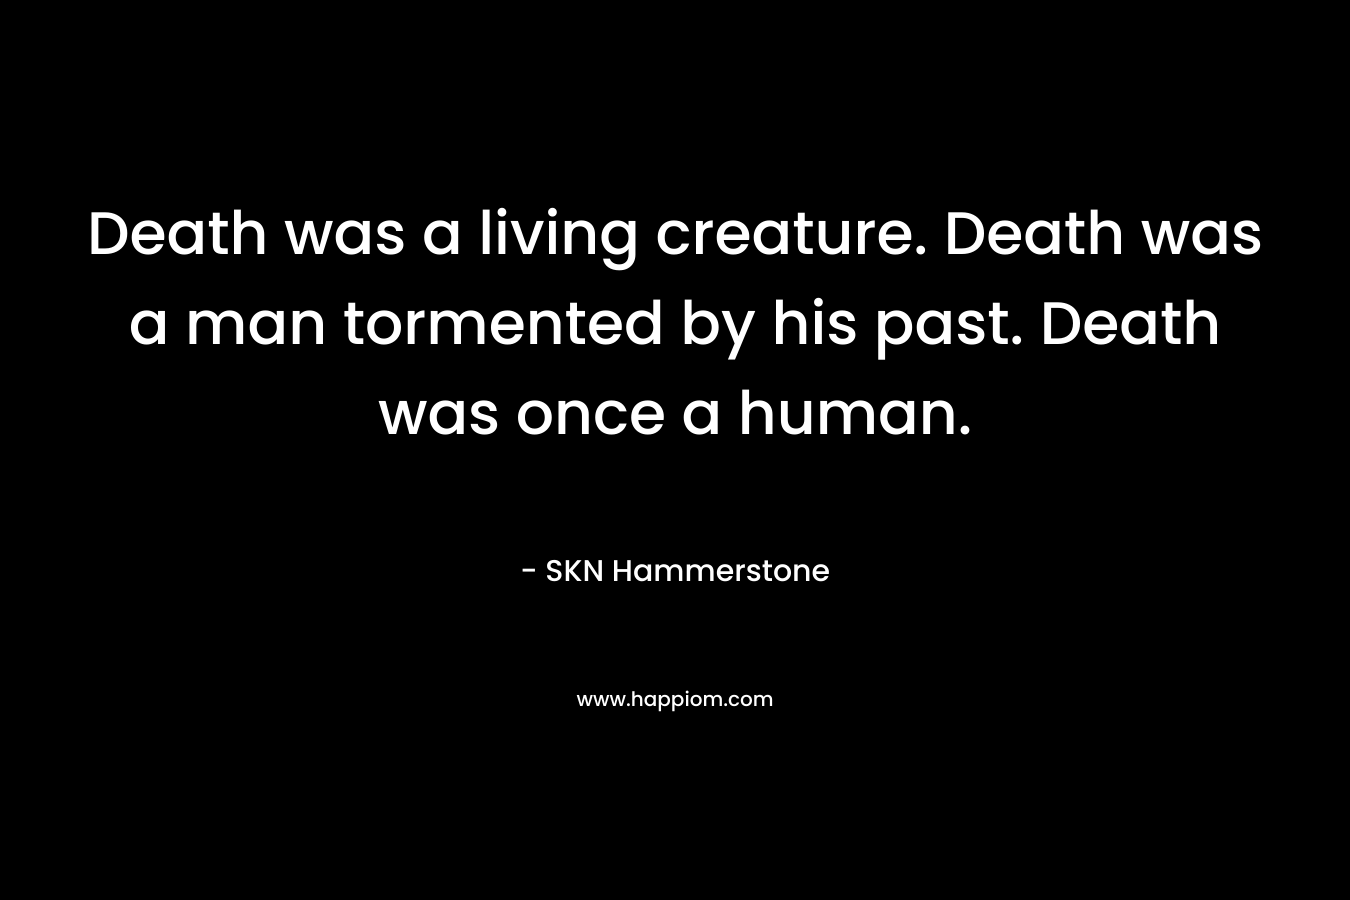 Death was a living creature. Death was a man tormented by his past. Death was once a human.